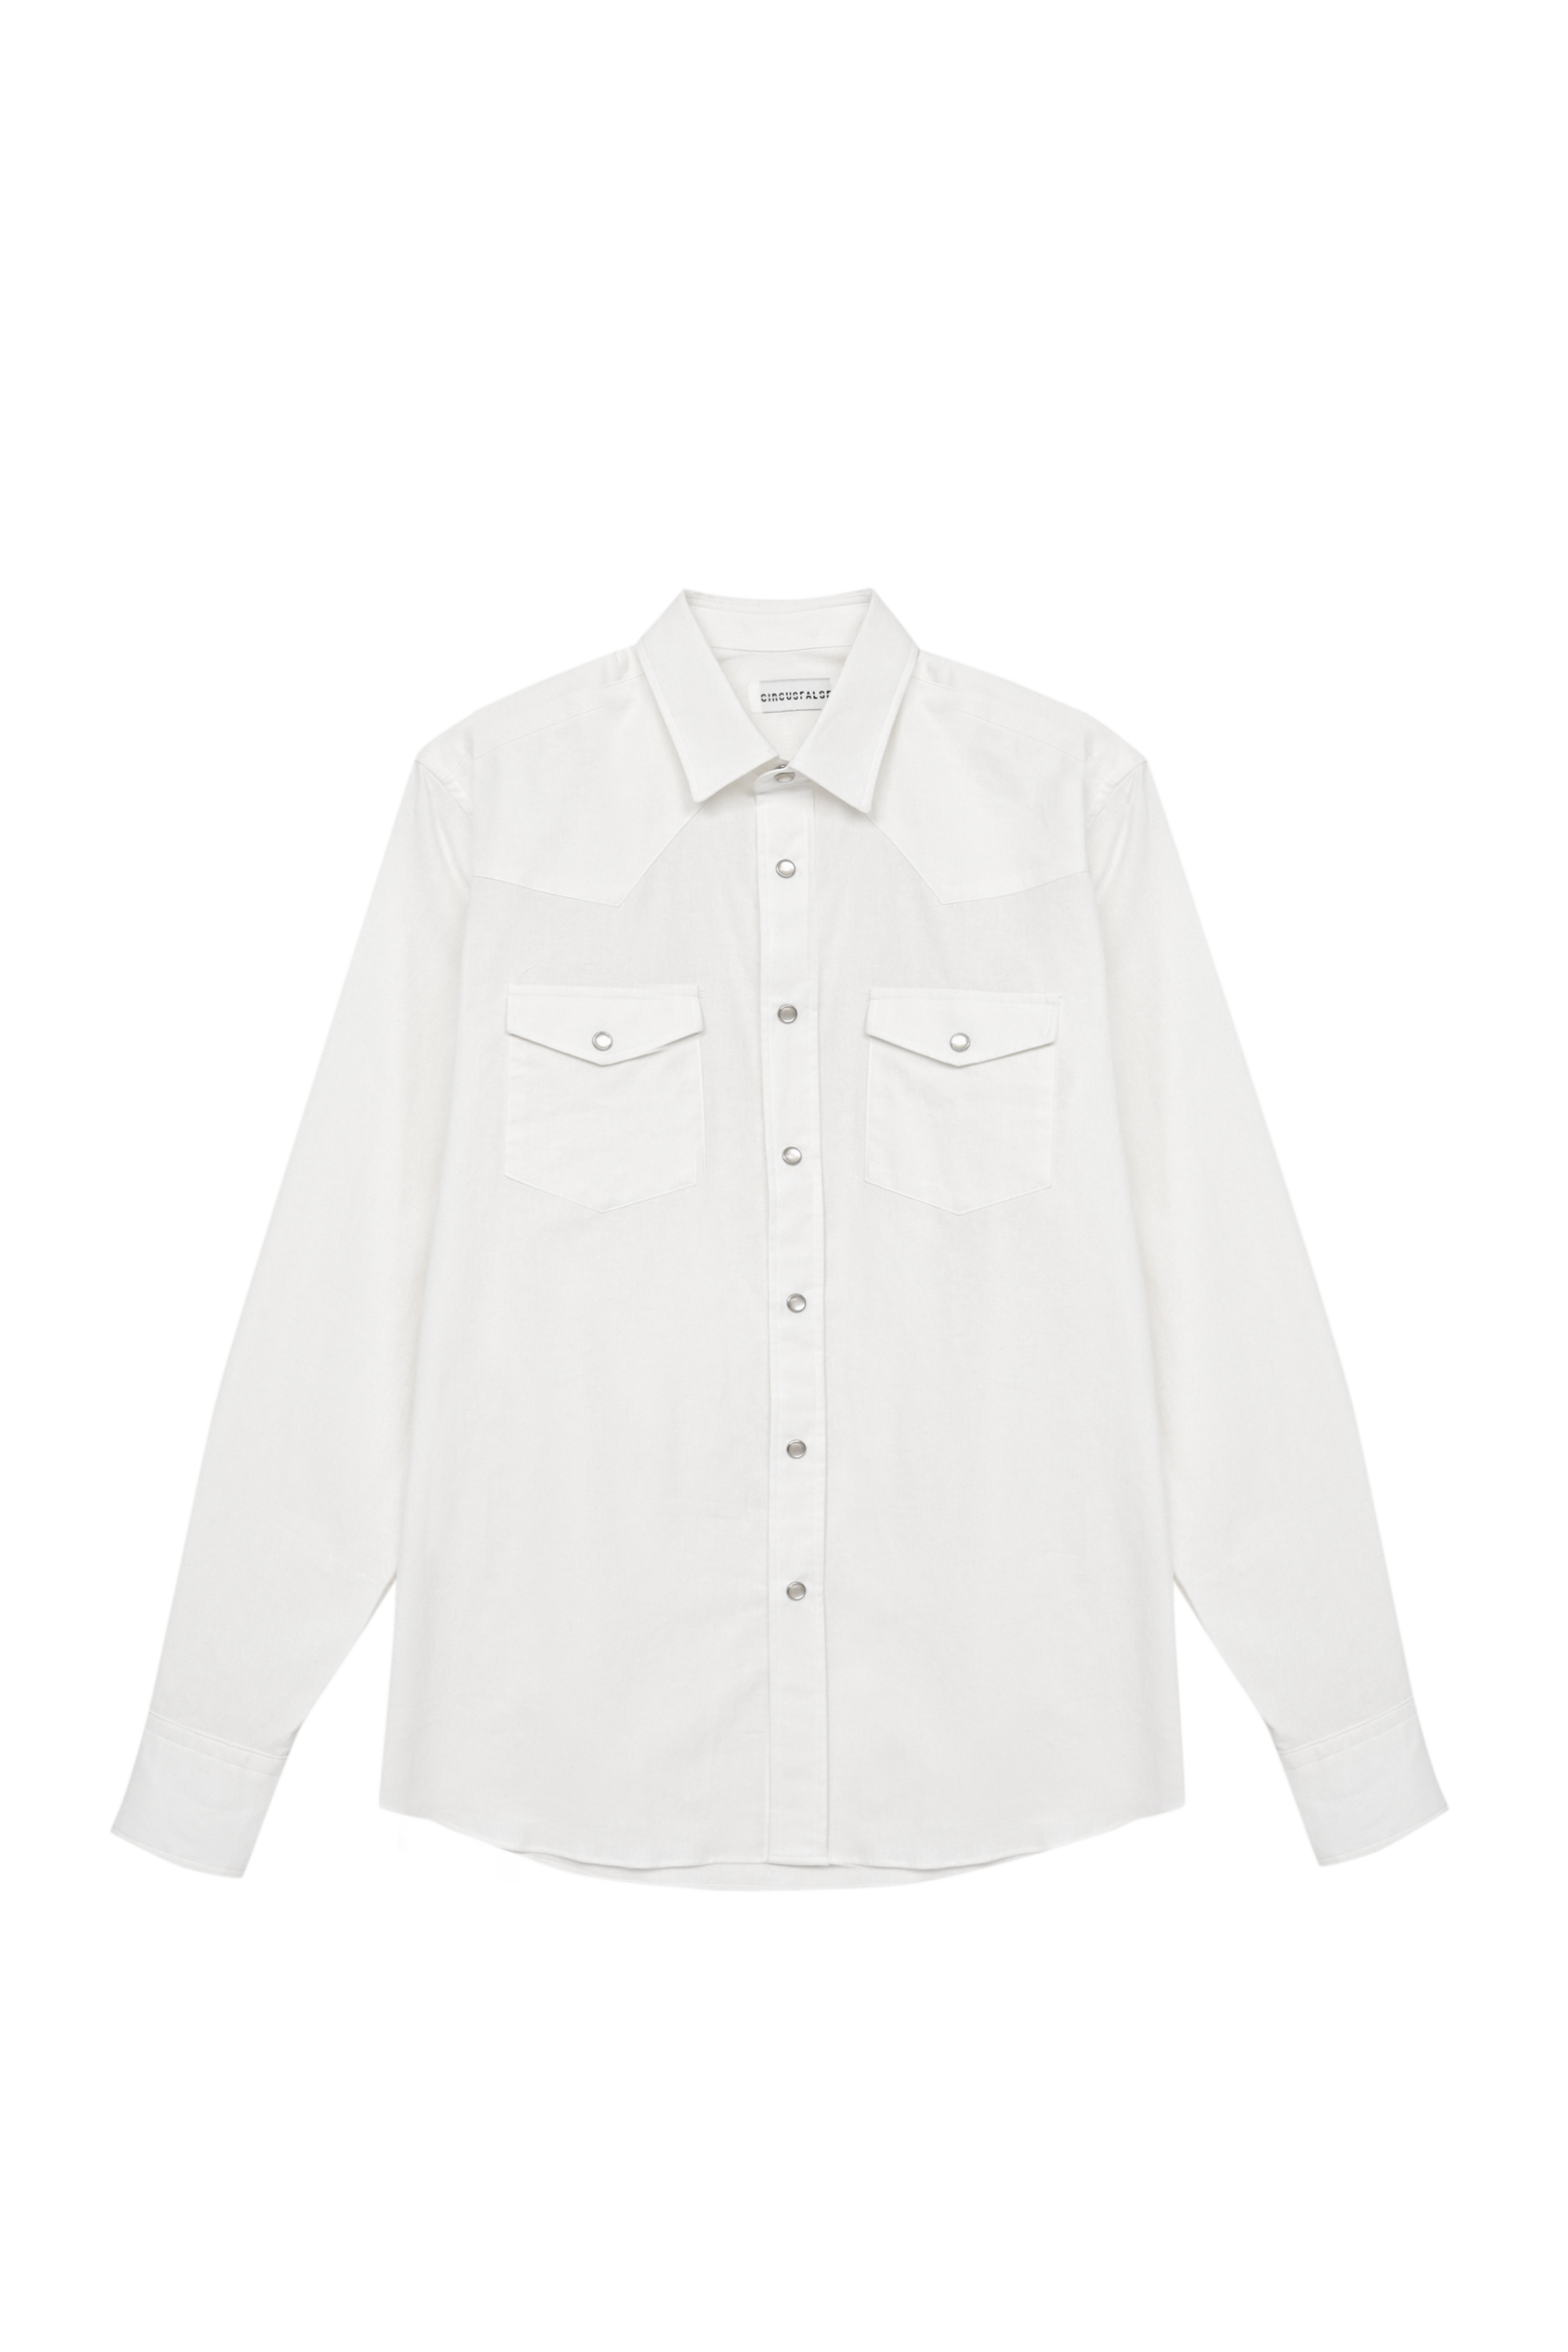 WESTERN SHIRTS IN WHITE FLANNEL